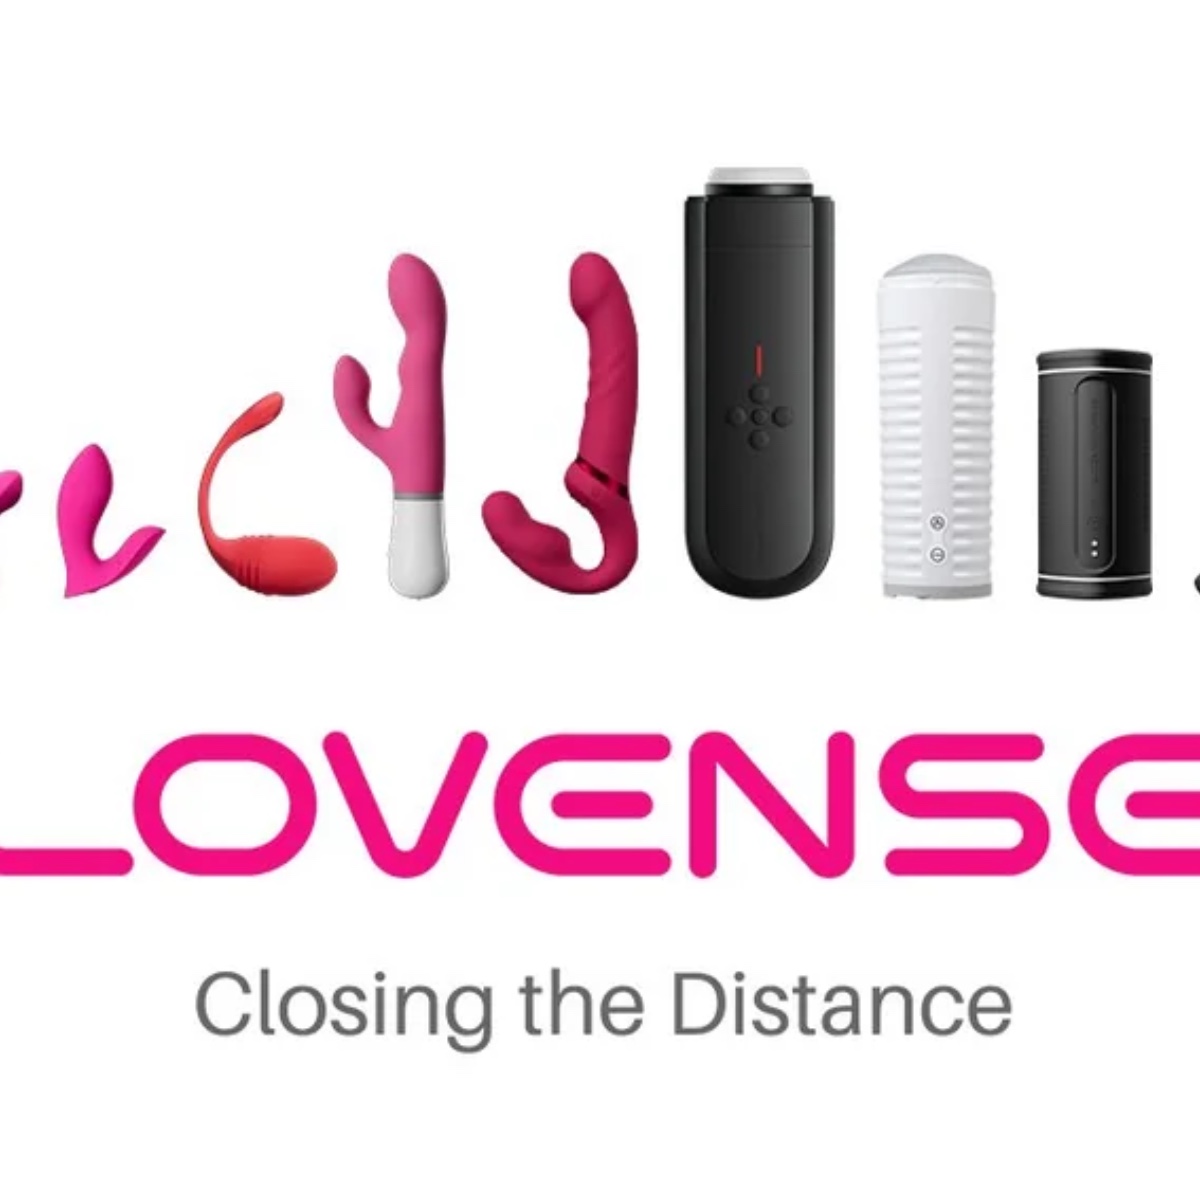 Lovense Solace vs. Other Lovense Products